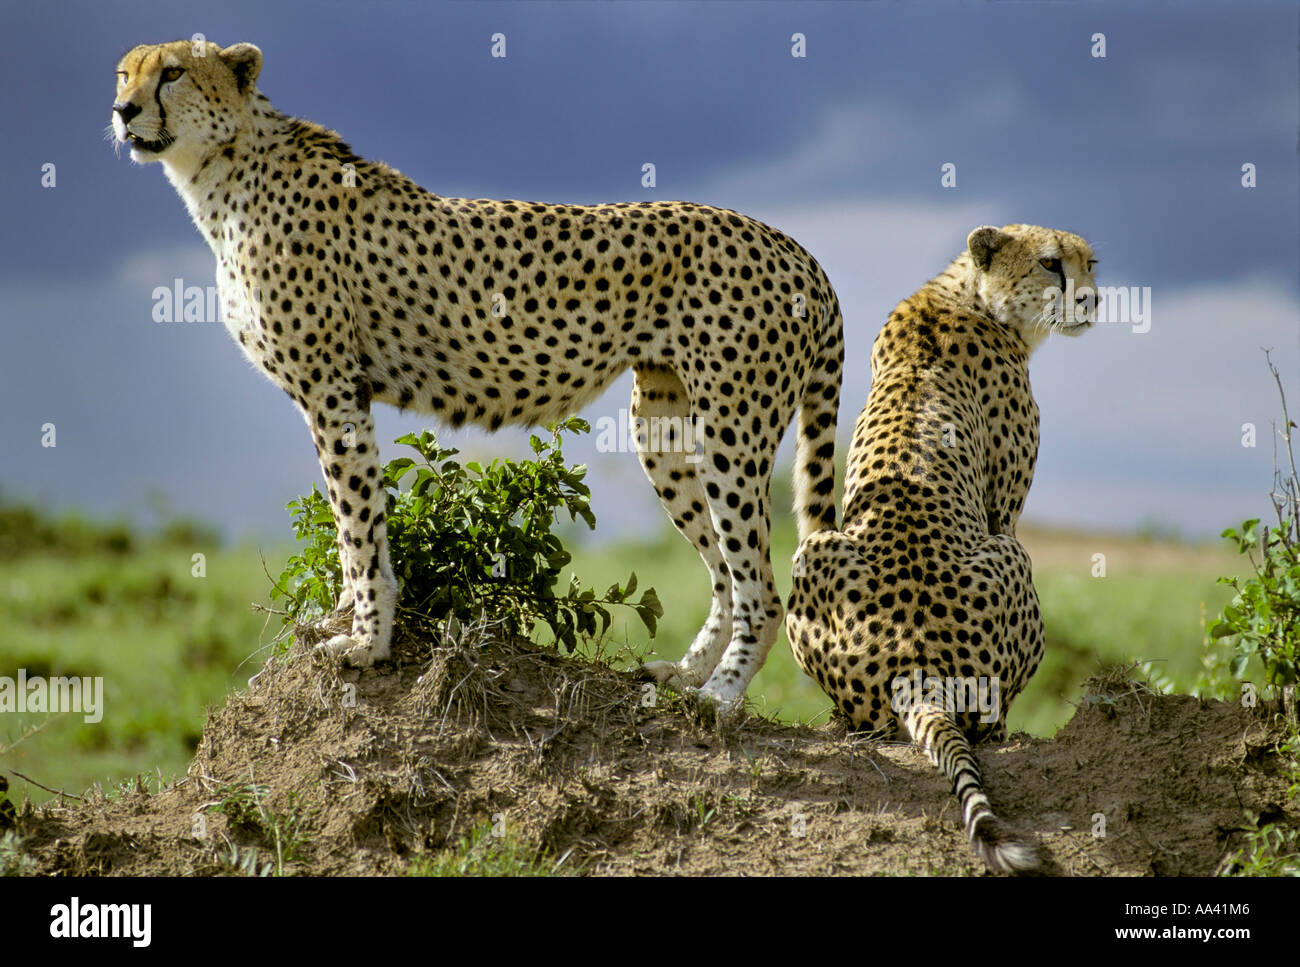 Two Cheetahs ( Acinonyx jubatus ) looking out from behind on a little hill - Masai Mara - Kenya, Africa Stock Photo